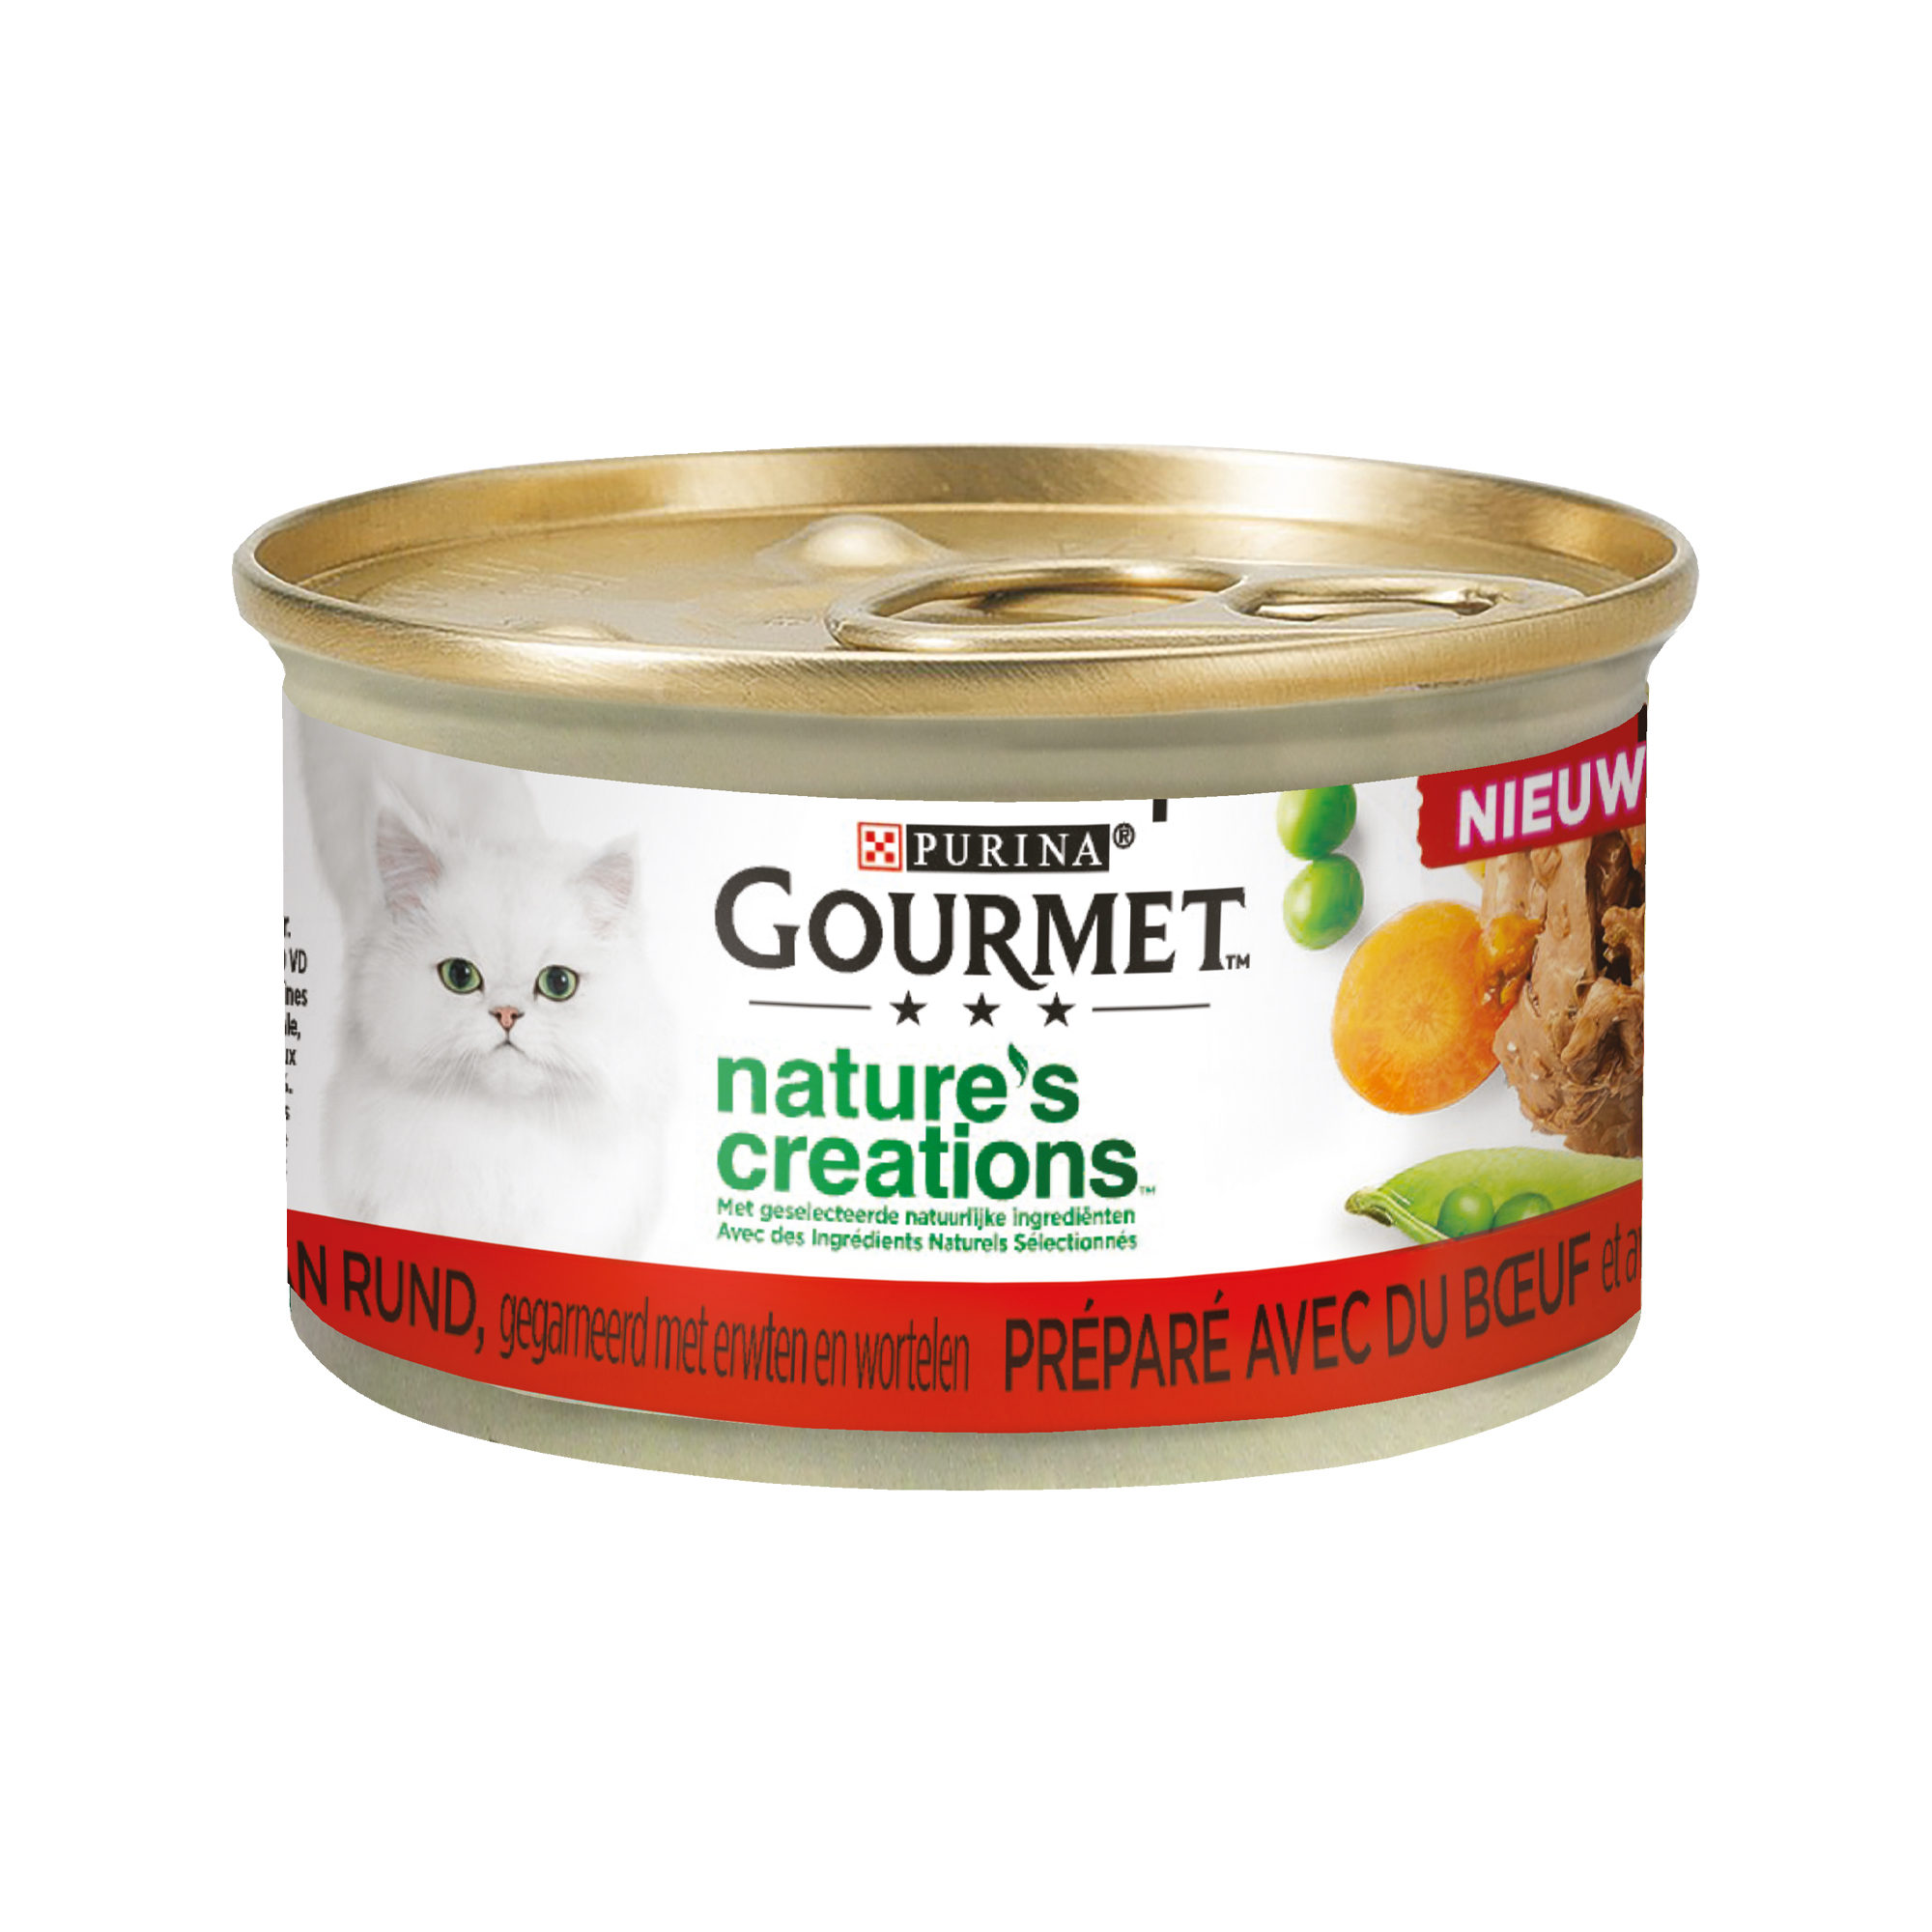 Purina Gourmet Nature's Creations Rind